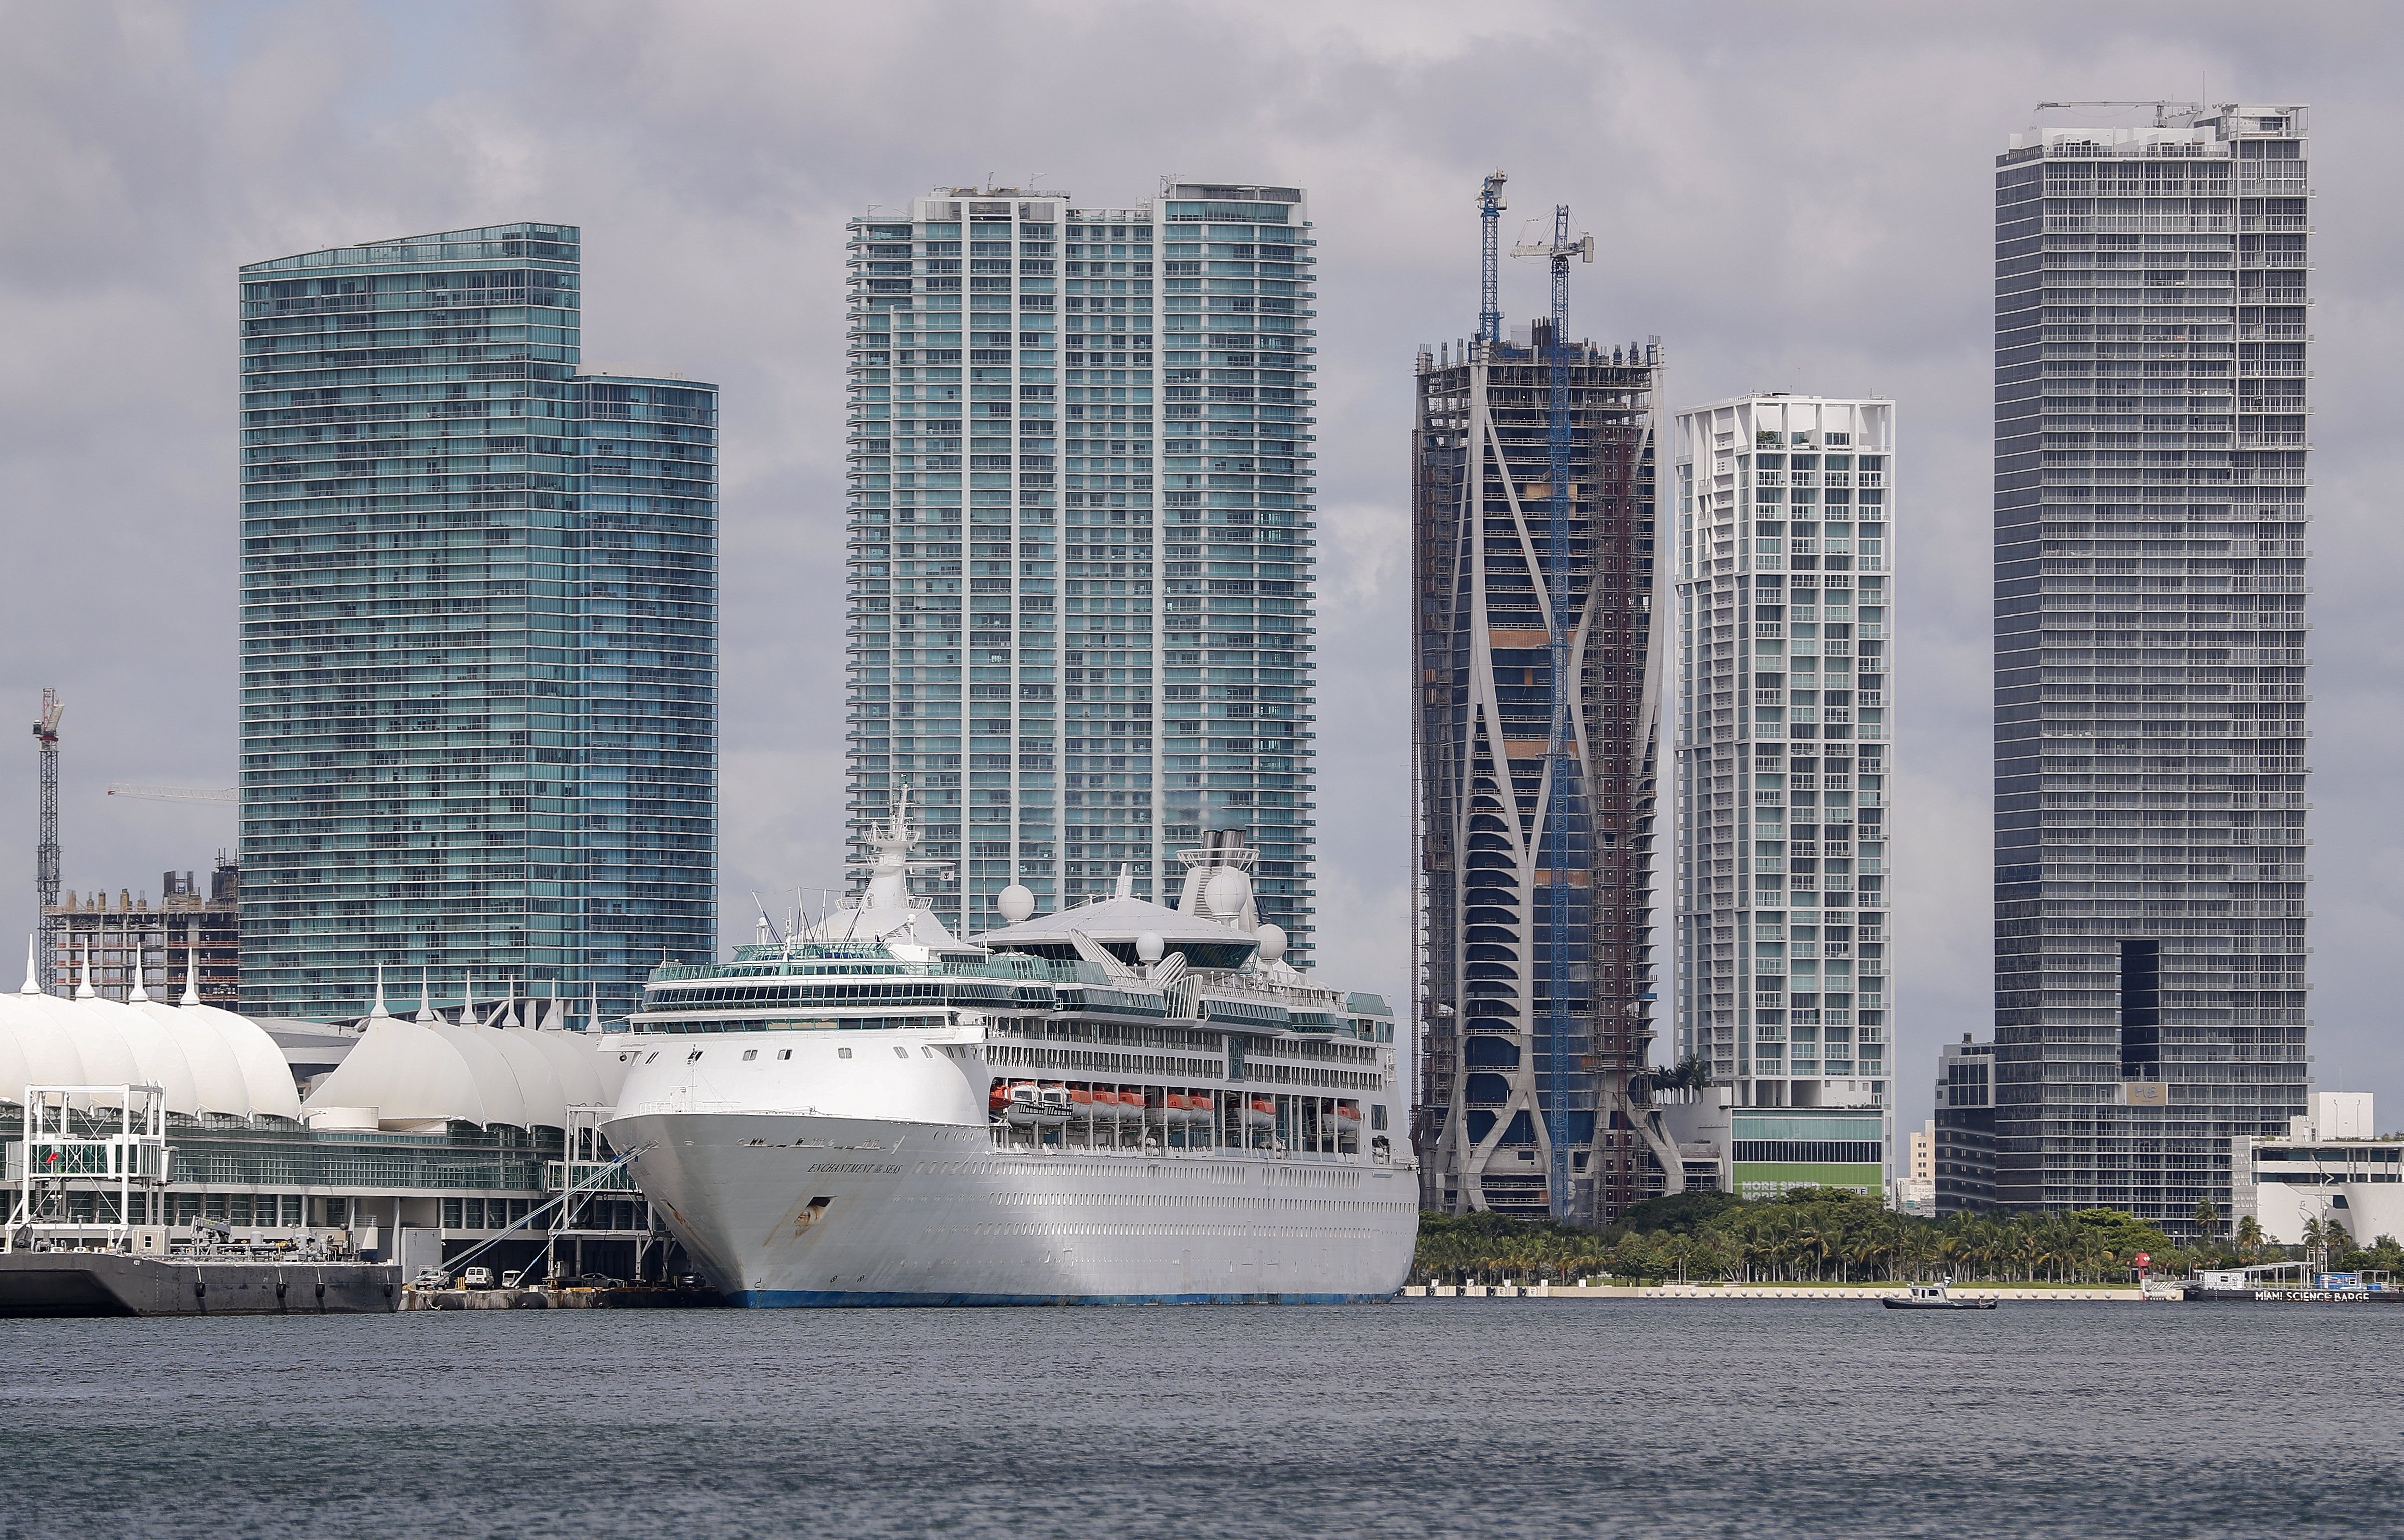 A cruise ship gets ready to depart from the Port of Miami ahead of the expected arrival of Hurricane Irma in Florida. Thousands of passengers opted to stay aboard than join the mad exodus out of the state. Photo: EPA-EFE